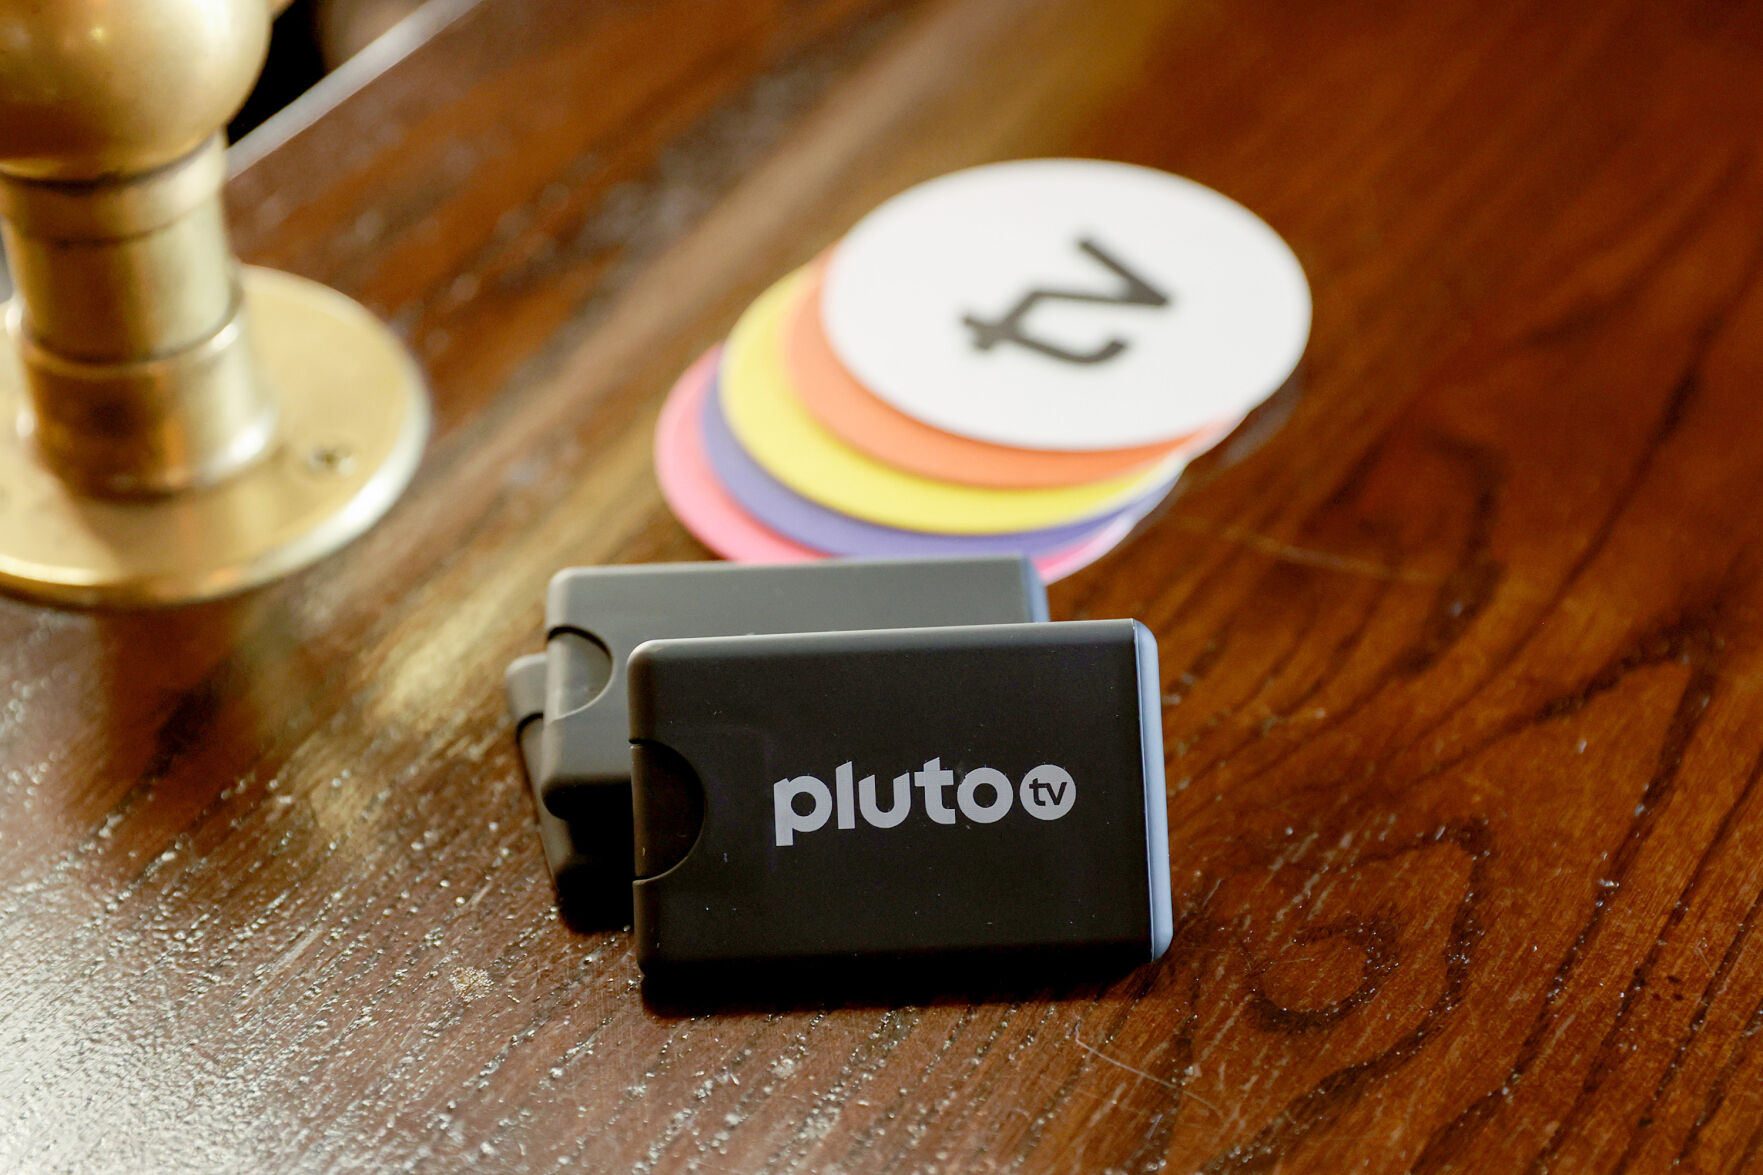 A view of Pluto TV branded products at the Pluto TV Green Room during Vulture Festival 2021 at The Hollywood Roosevelt on Nov. 14, 2021 in Los Angeles.     PHOTO CREDIT: Tribune News Service